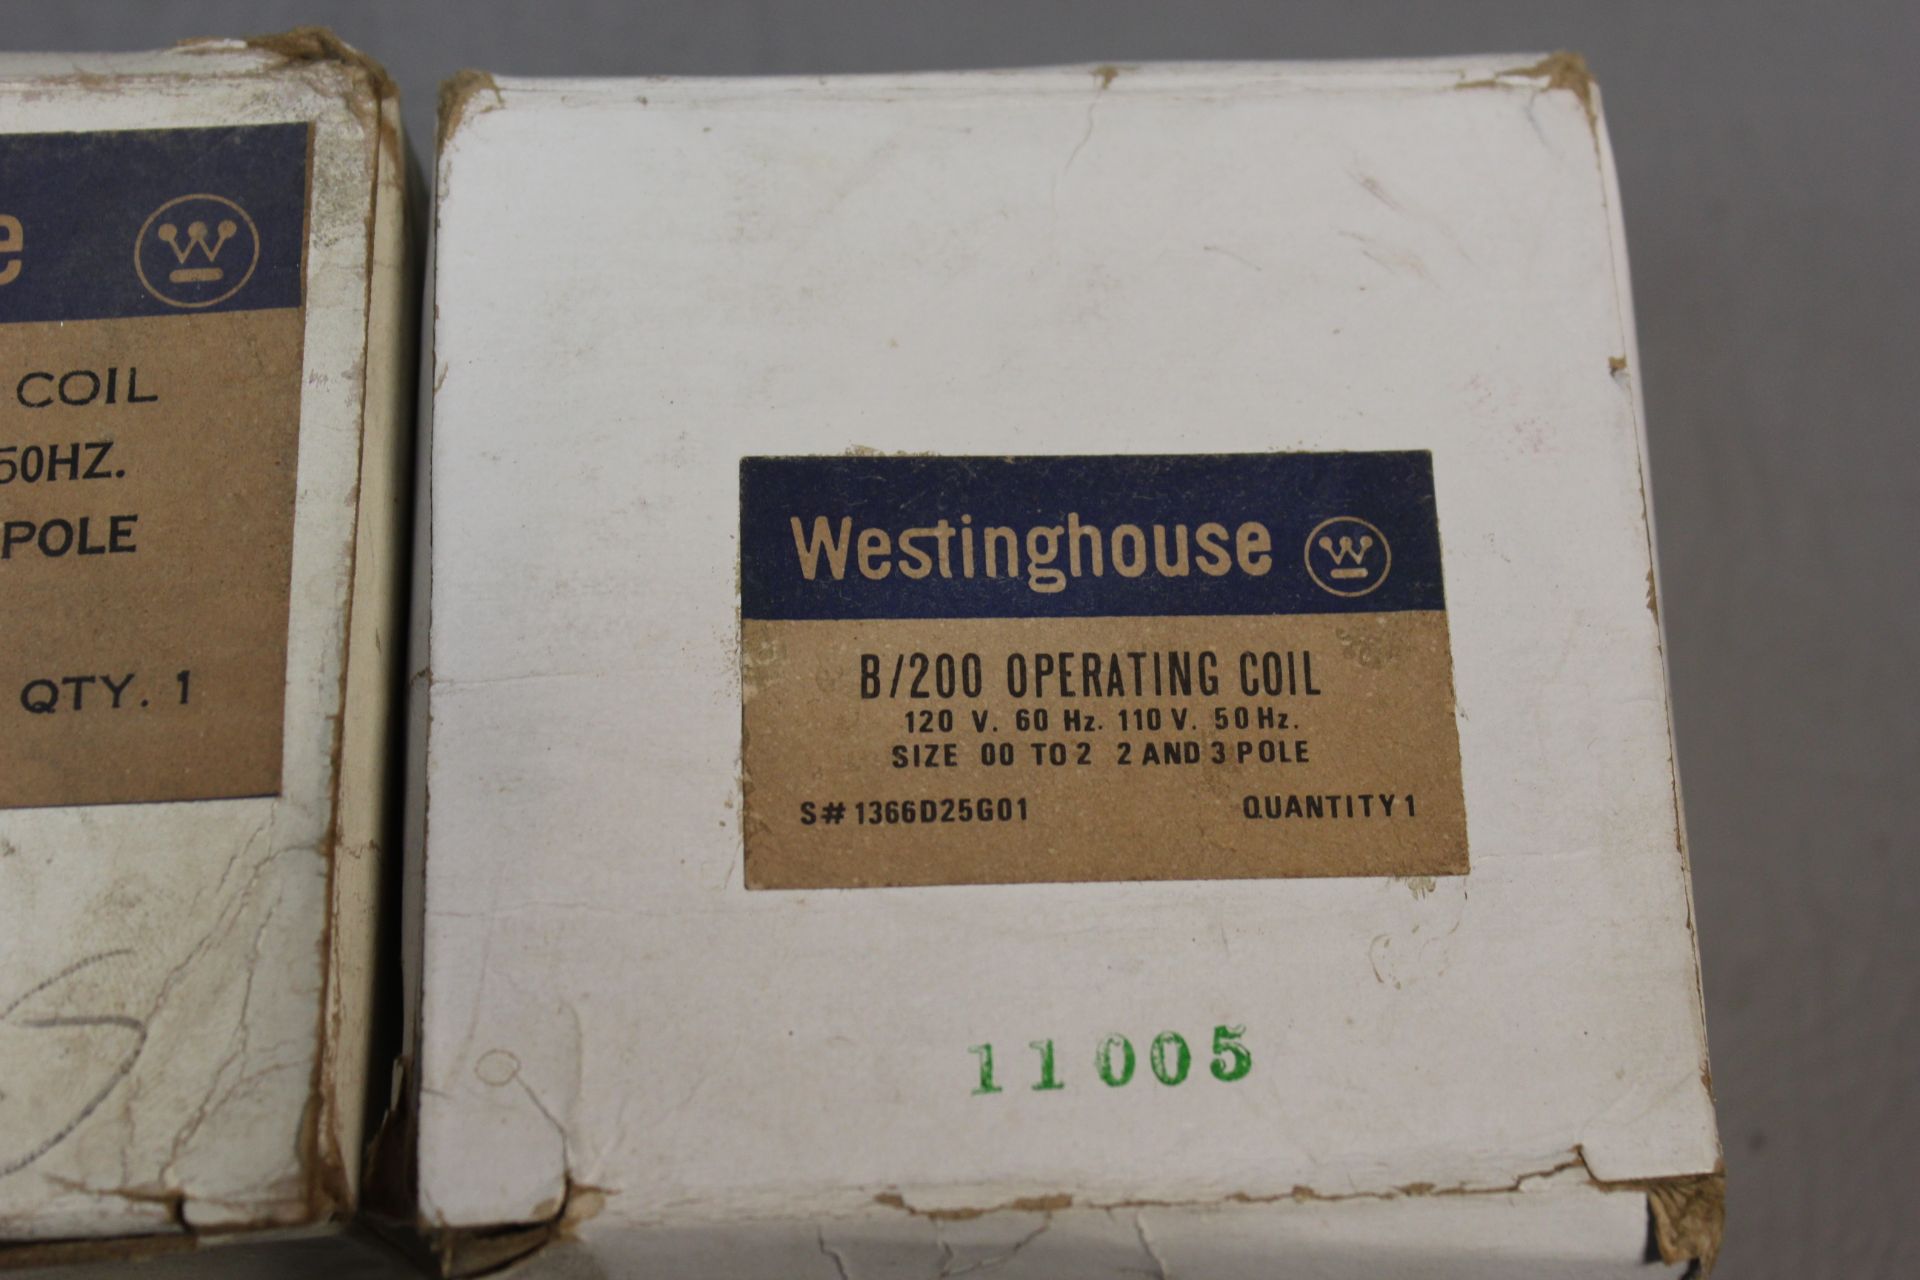 2 NEW WESTINGHOUSE B/200 OPERATING COILS - Image 2 of 3